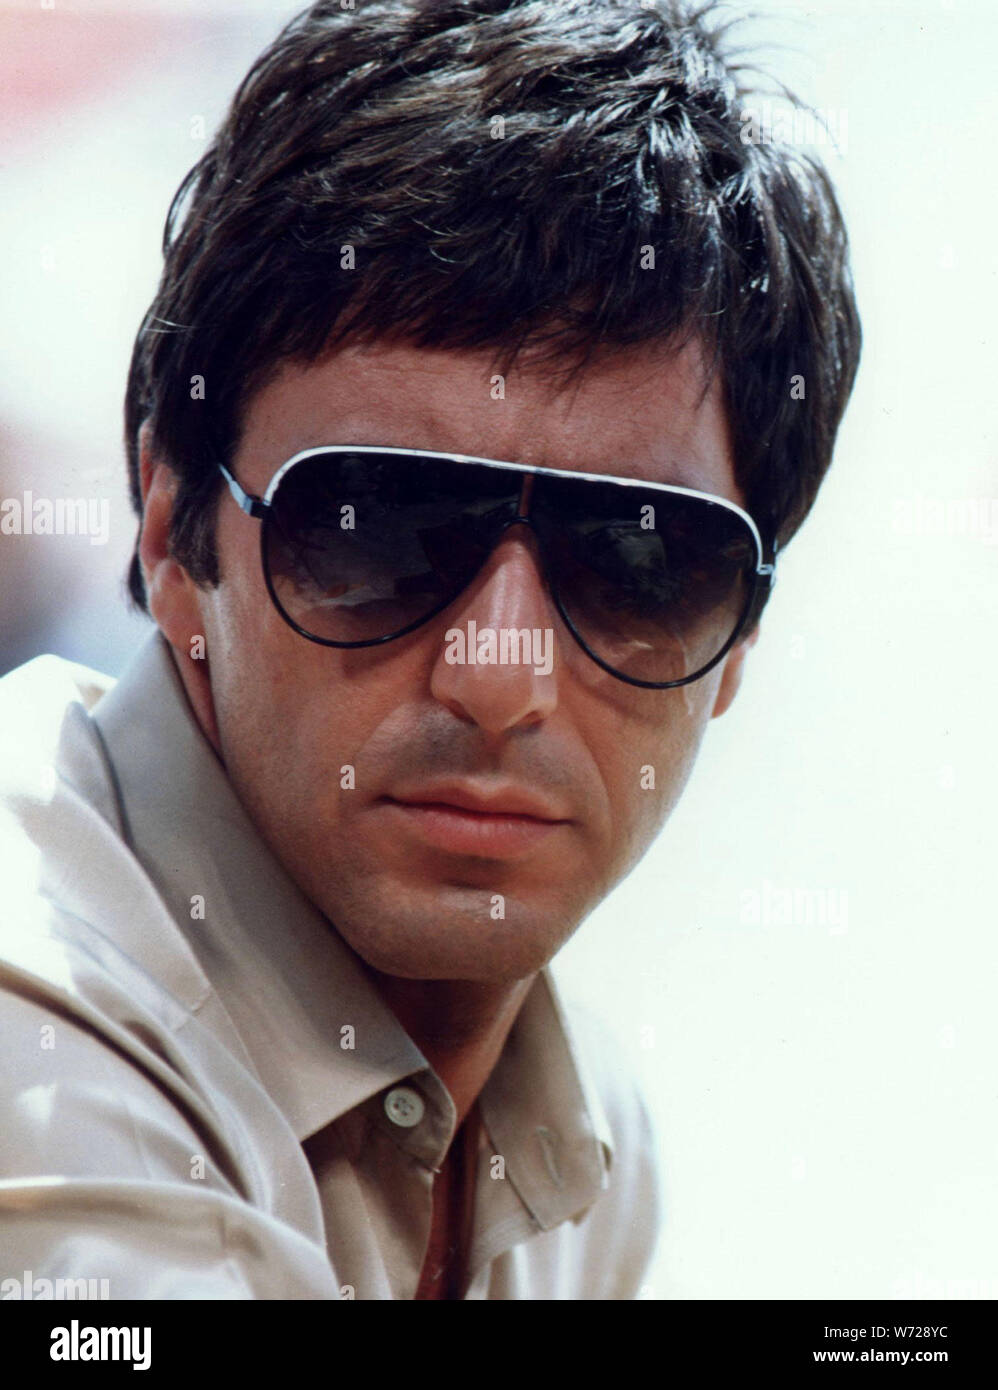 AL PACINO in SCARFACE (1983), directed by BRIAN DE PALMA. Credit: UNIVERSAL  PICTURES / Album Stock Photo - Alamy